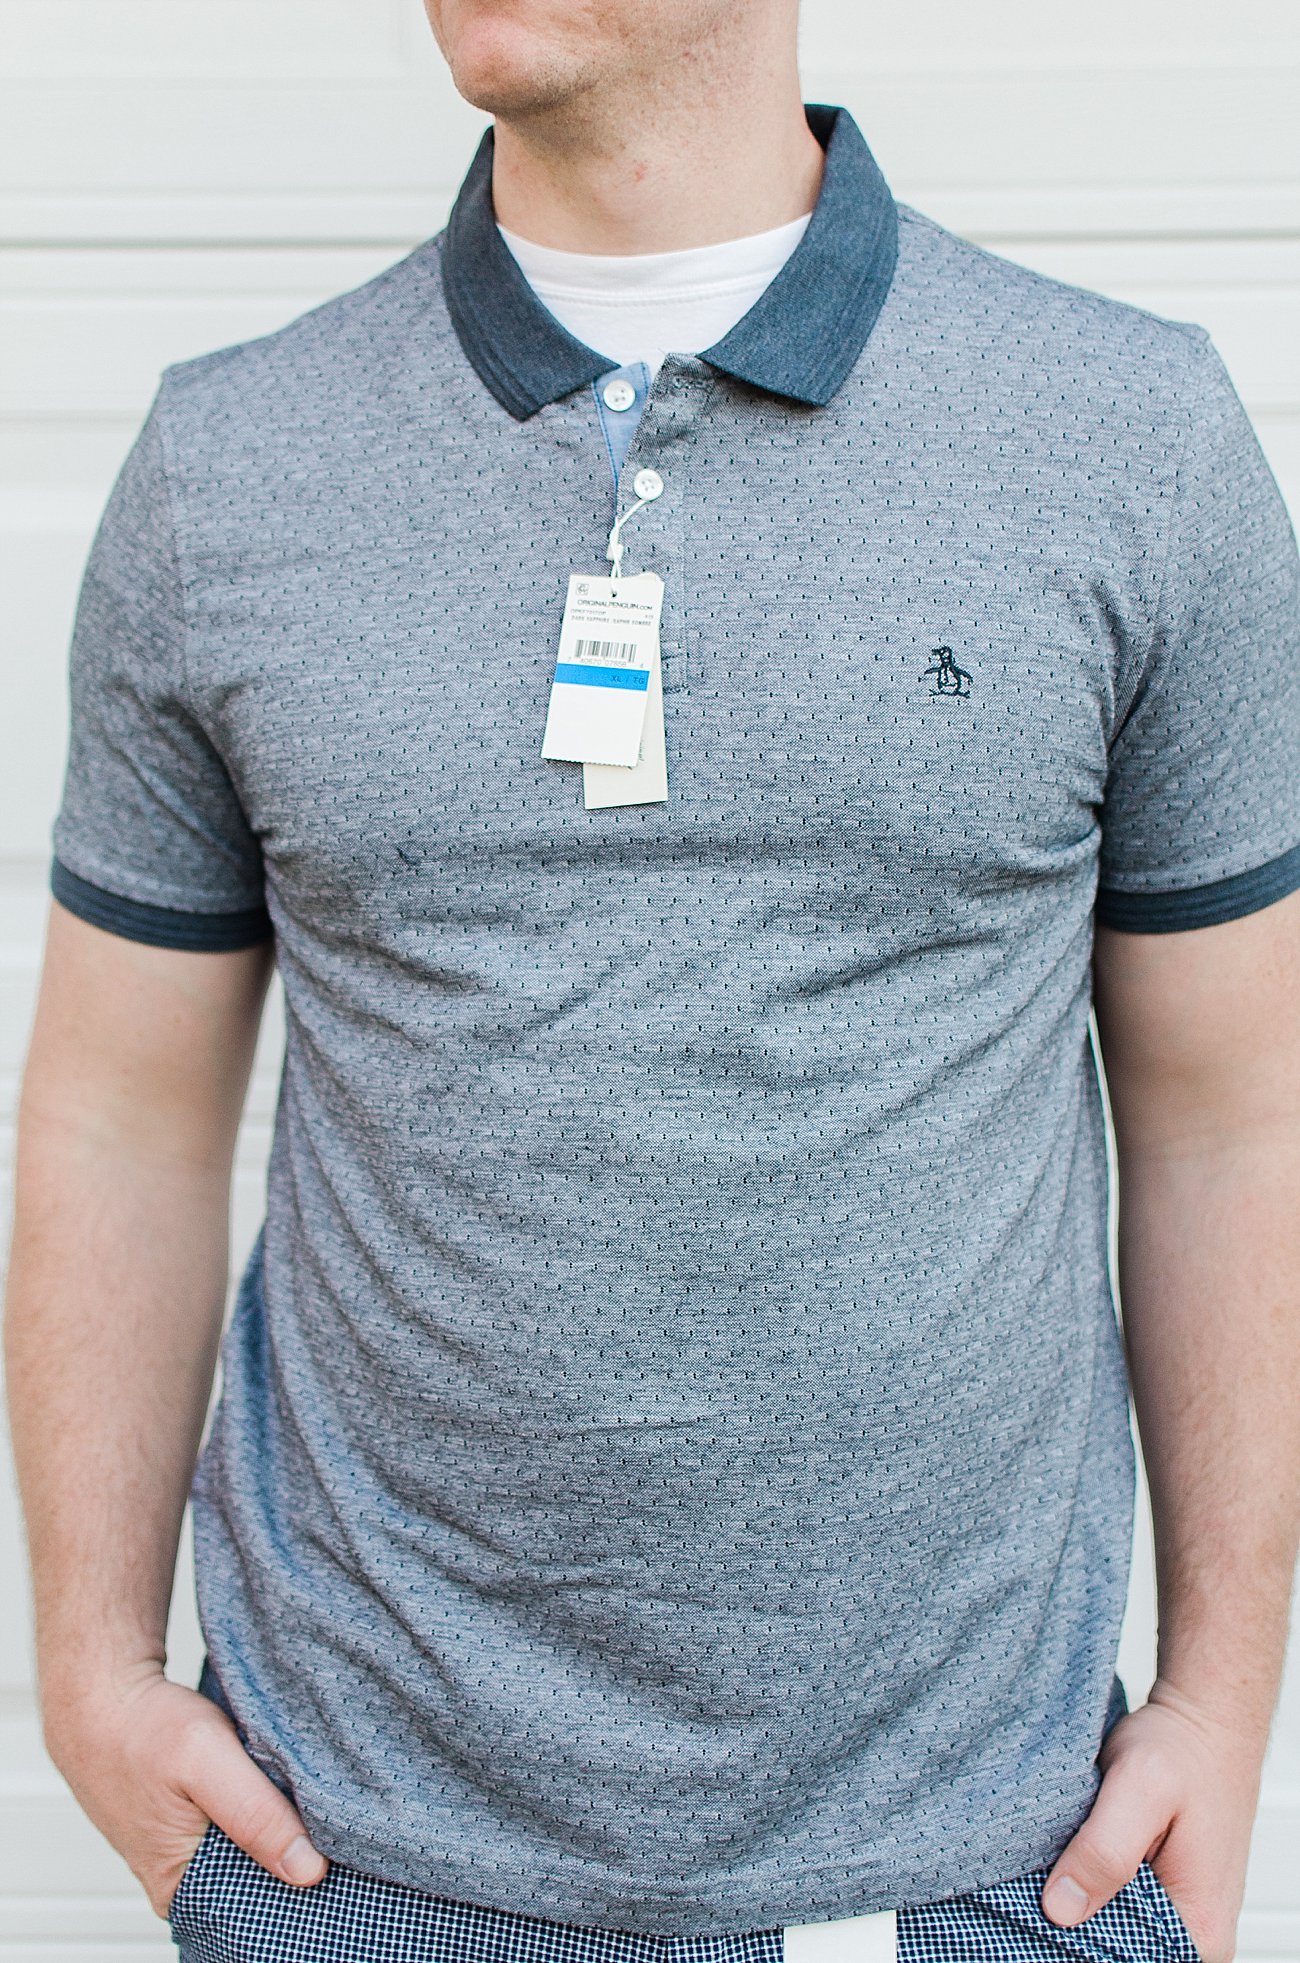 ORIGINAL PENGUIN - Jax Heritage Slim Fit Jacquard Polo - SIZE XL - $69 - John's Recent Stitch Fix for Men Review by fashion blogger Still Being Molly